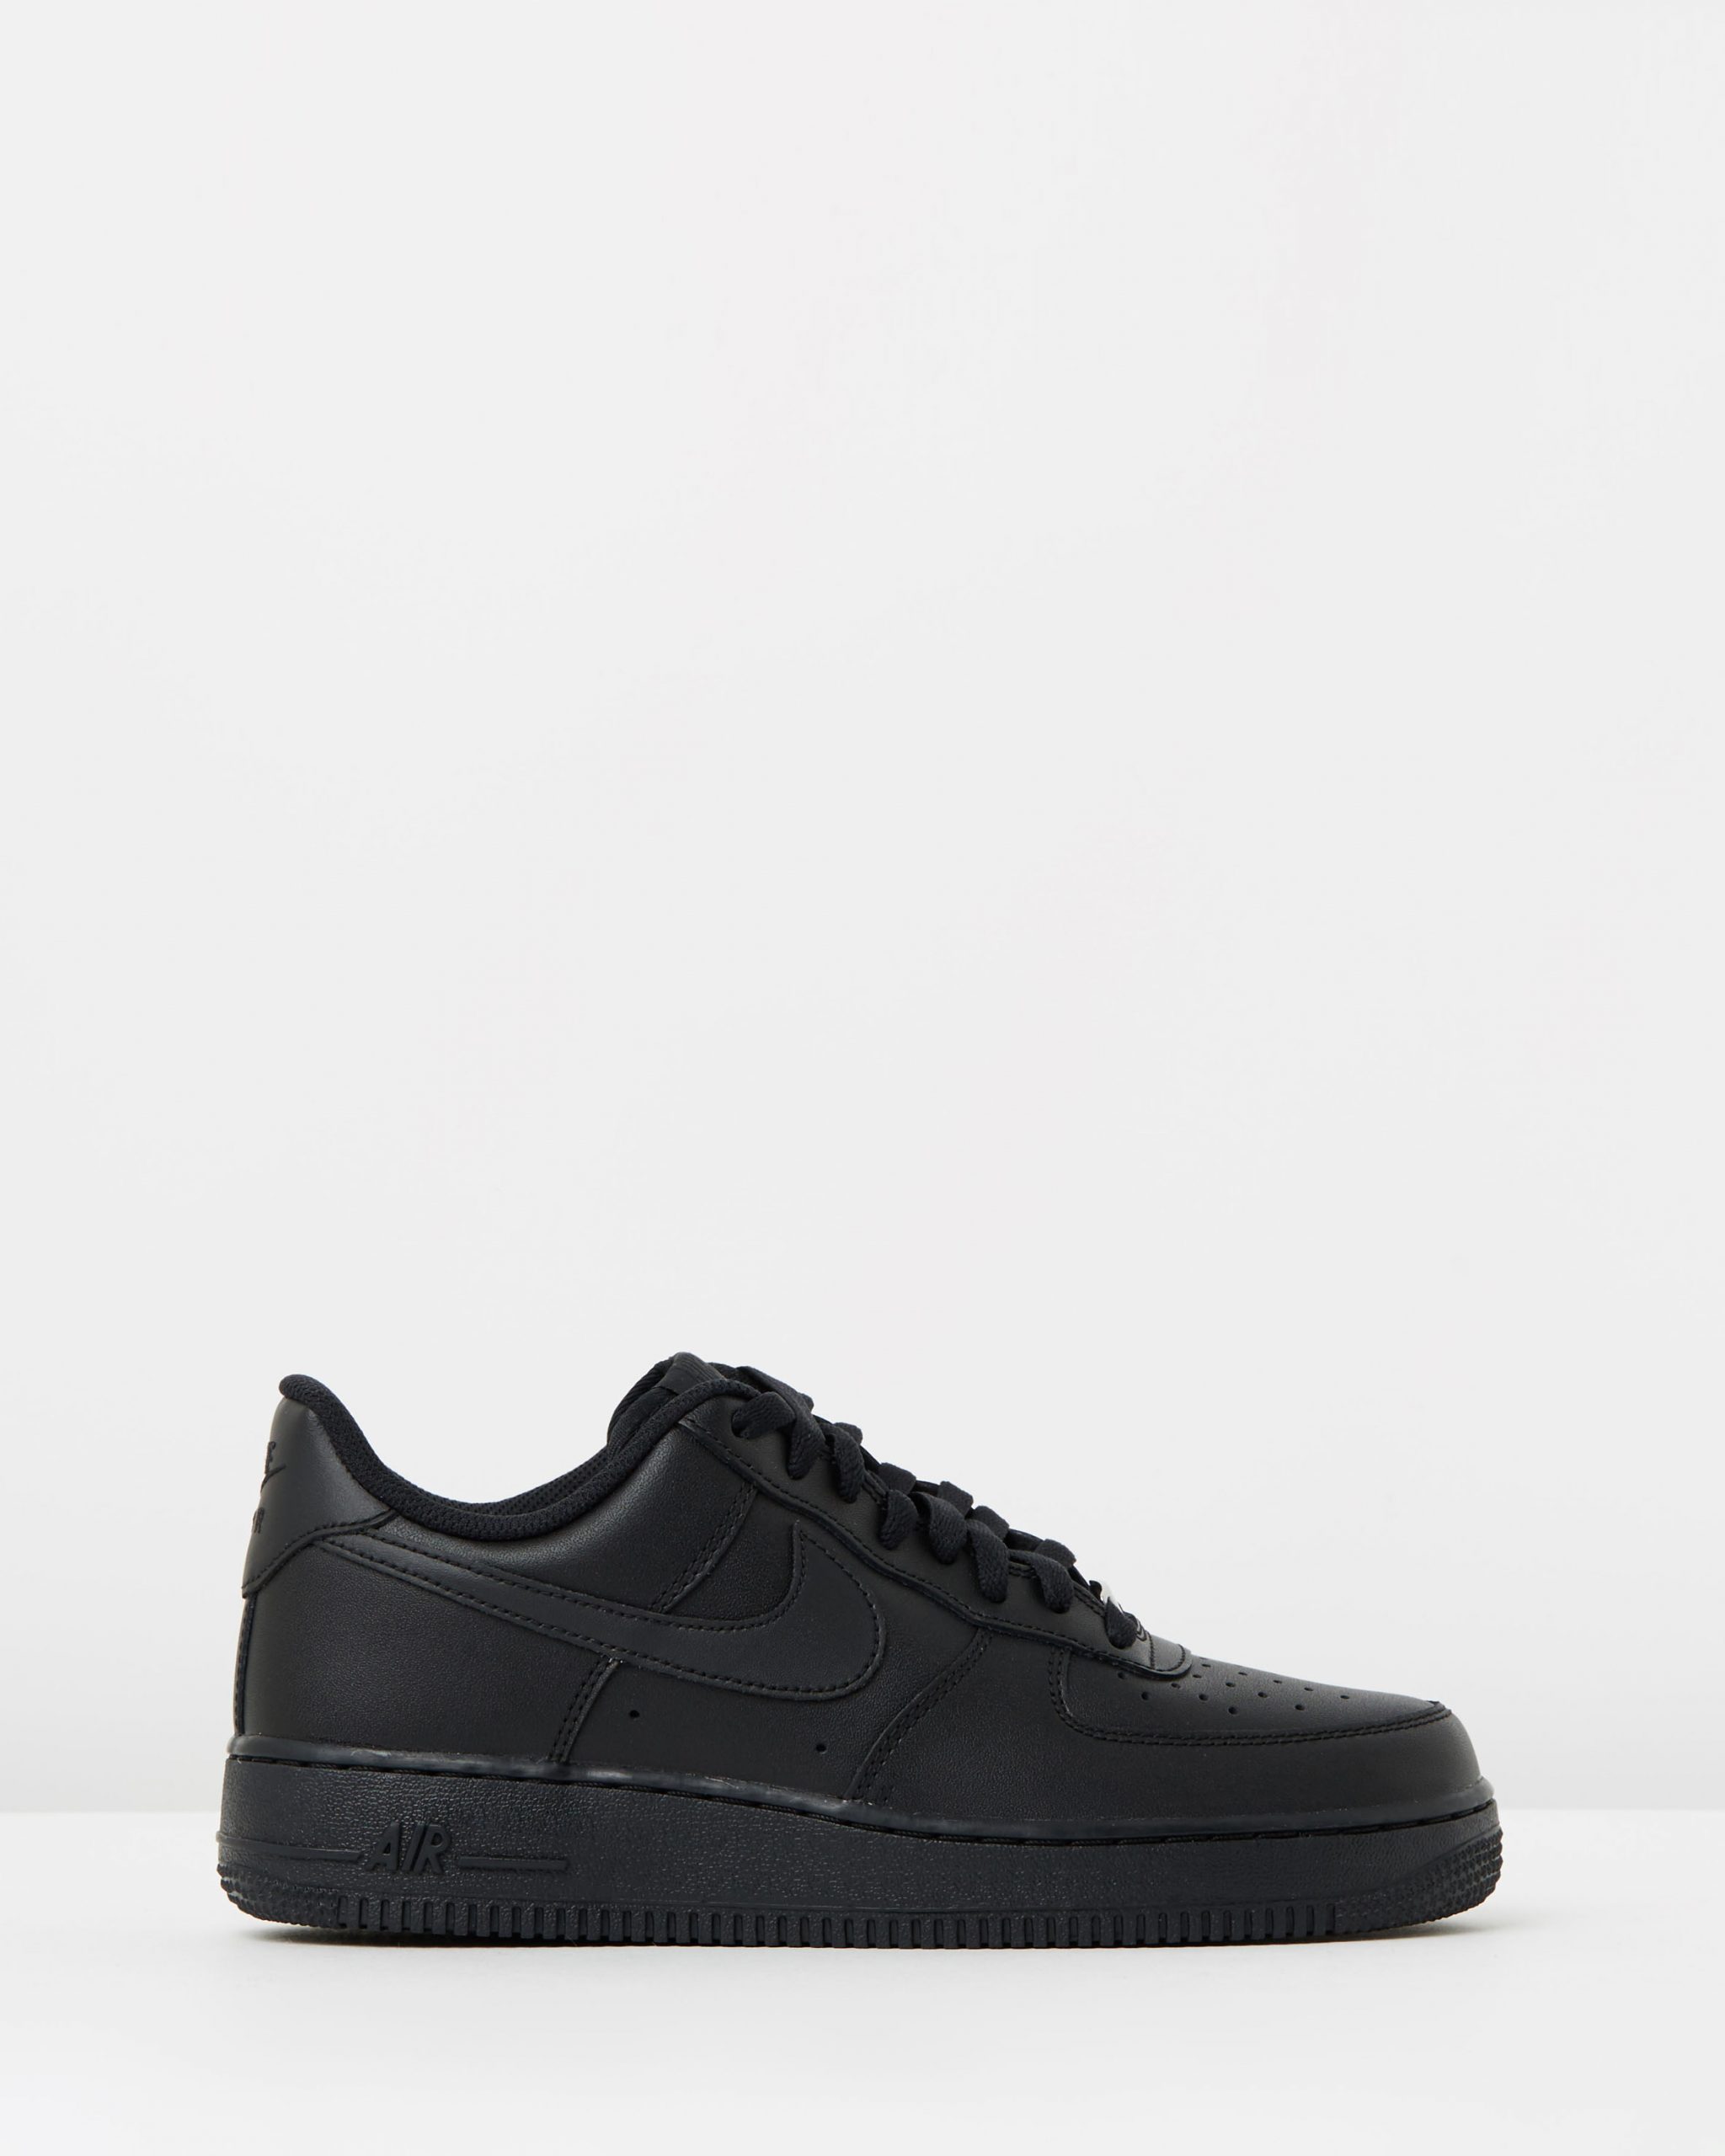 Women's Nike Air Force 1 '07 Shoes